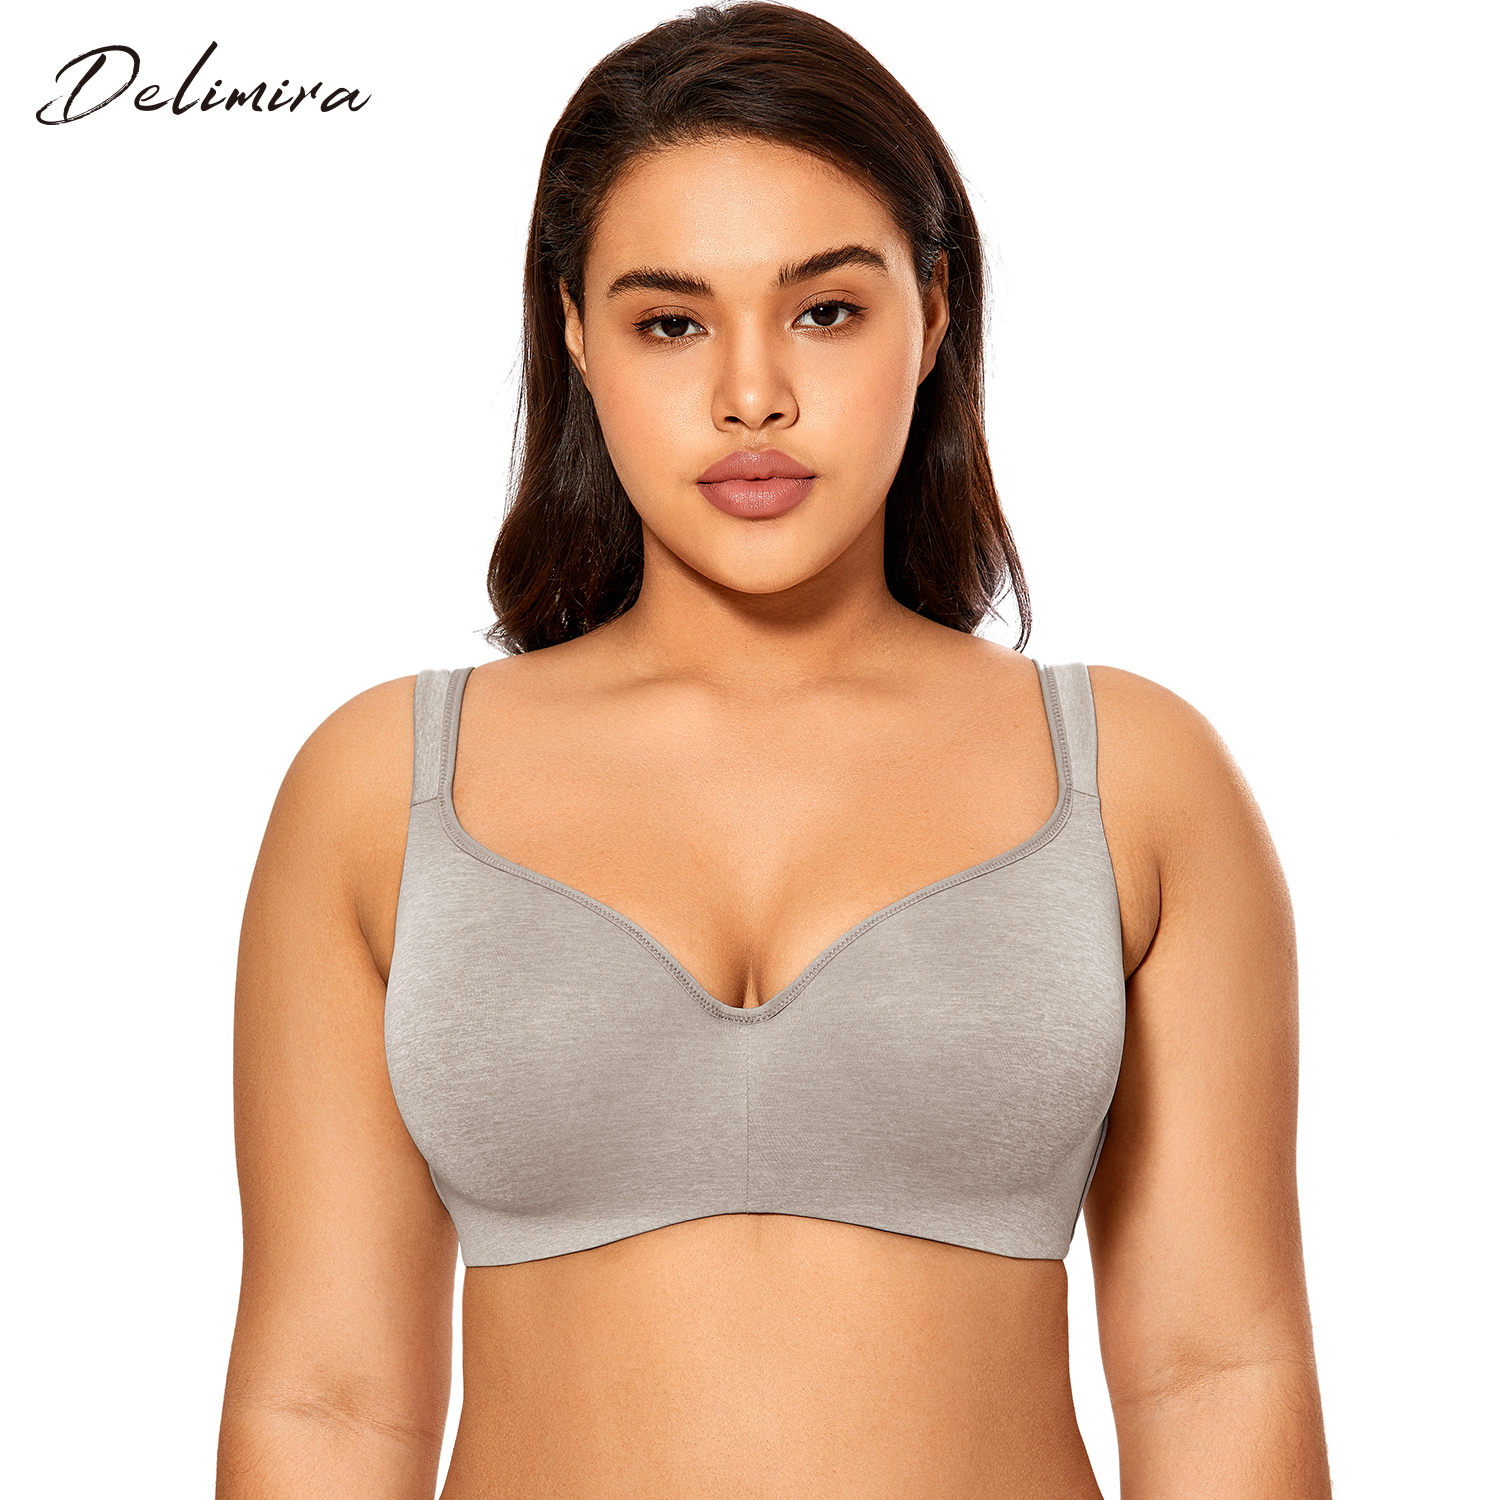 Delimira Women's Smooth Full Coverage Big Size T-Shirt Bra - Price